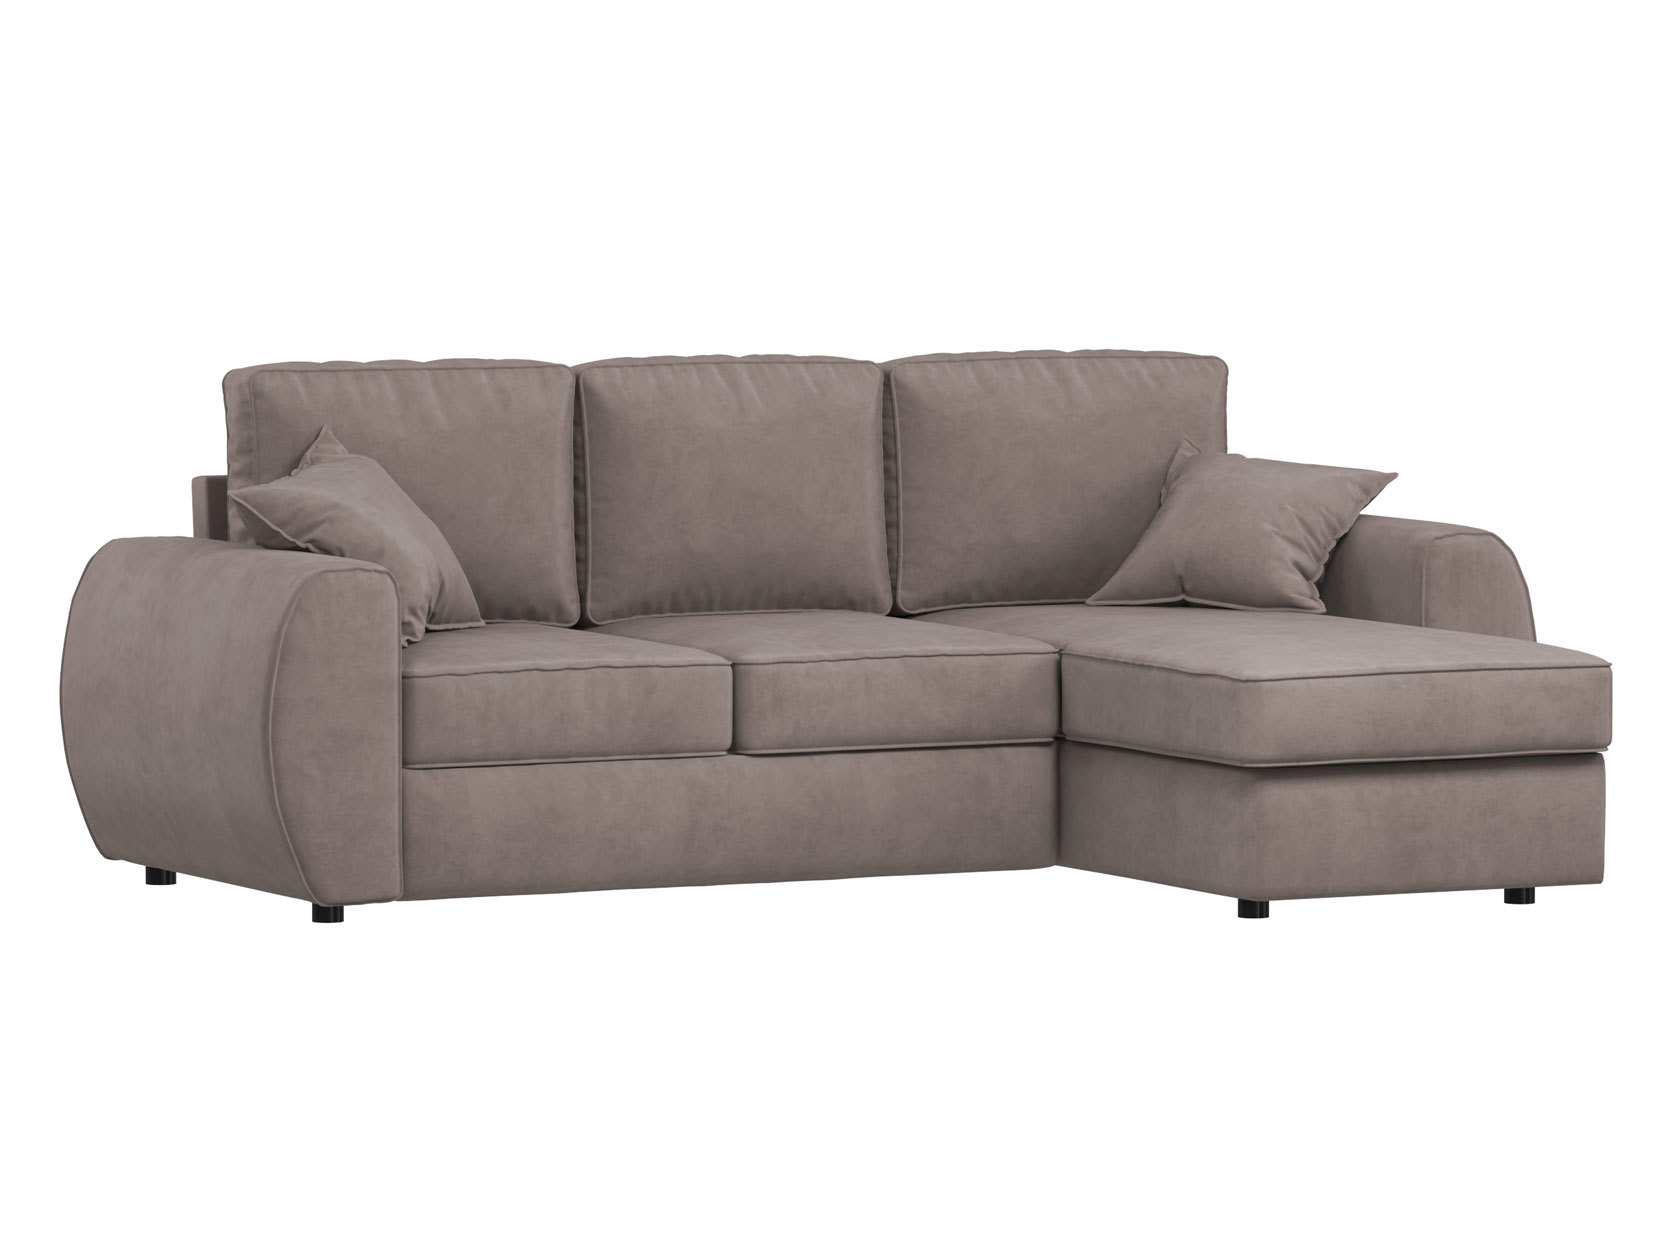 Pearce square arm sectional